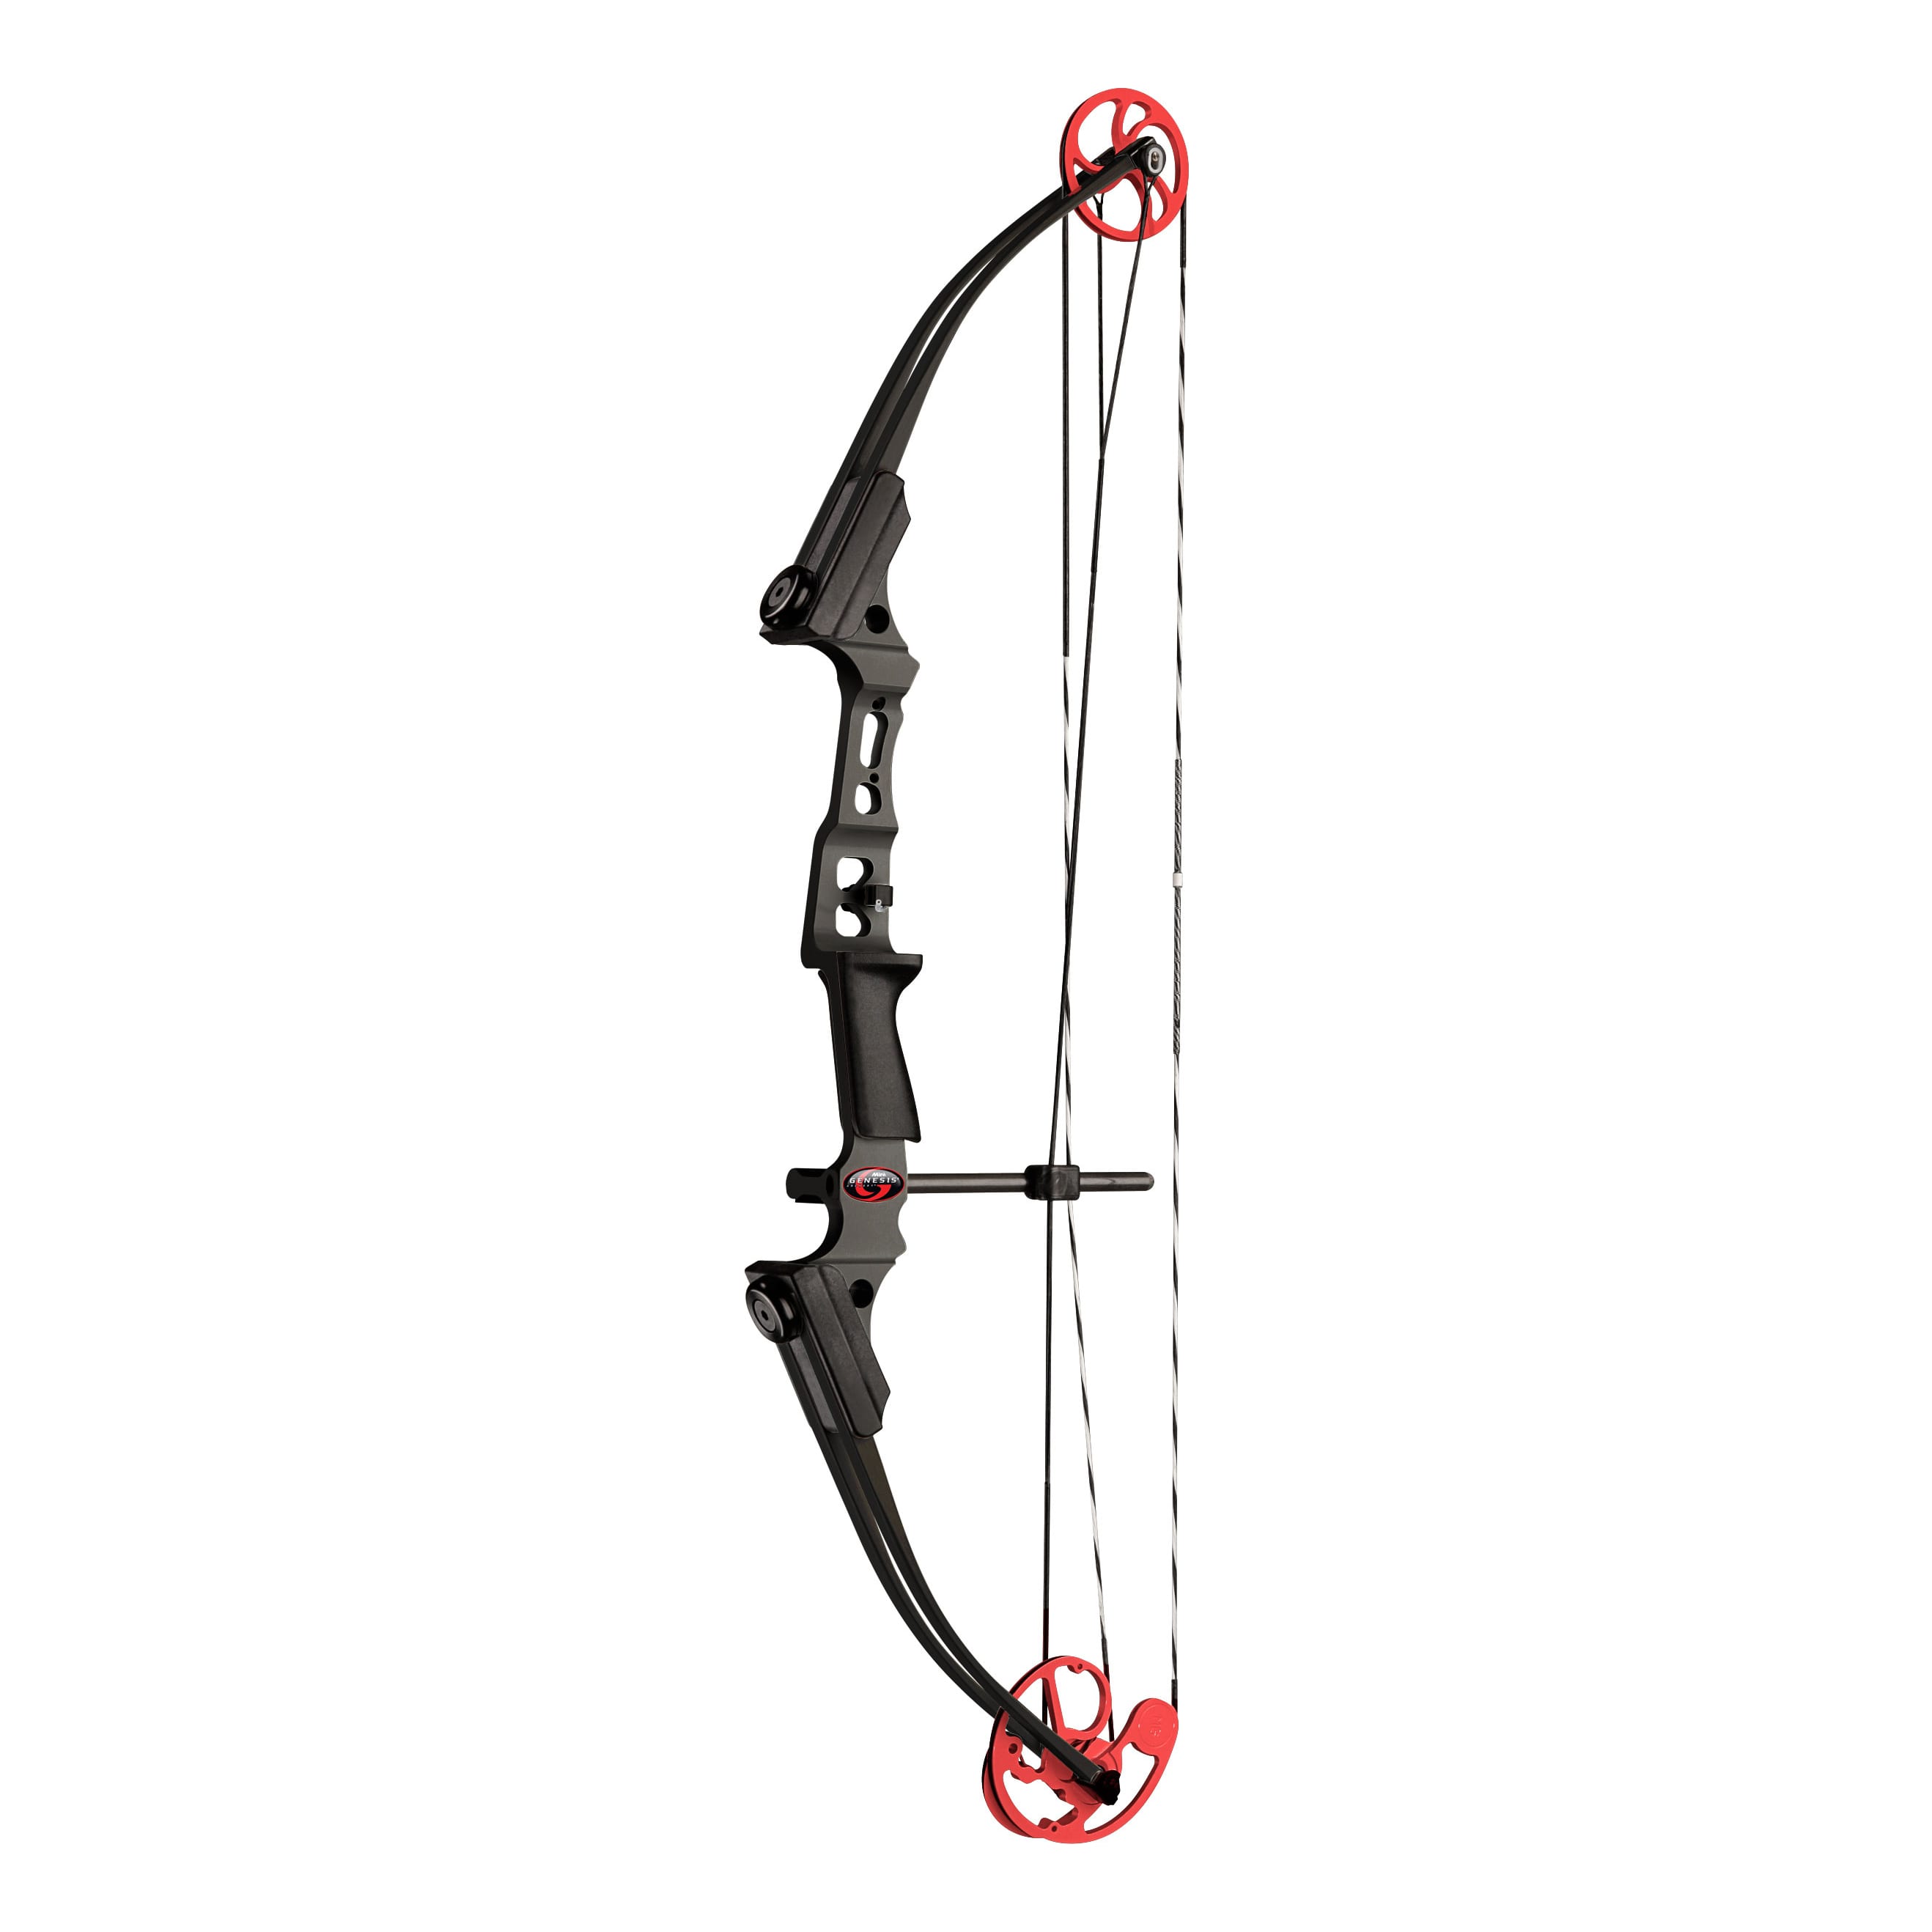 Kids Bow and Arrow: Kids Hunting & Target Compound Bow Archery Set